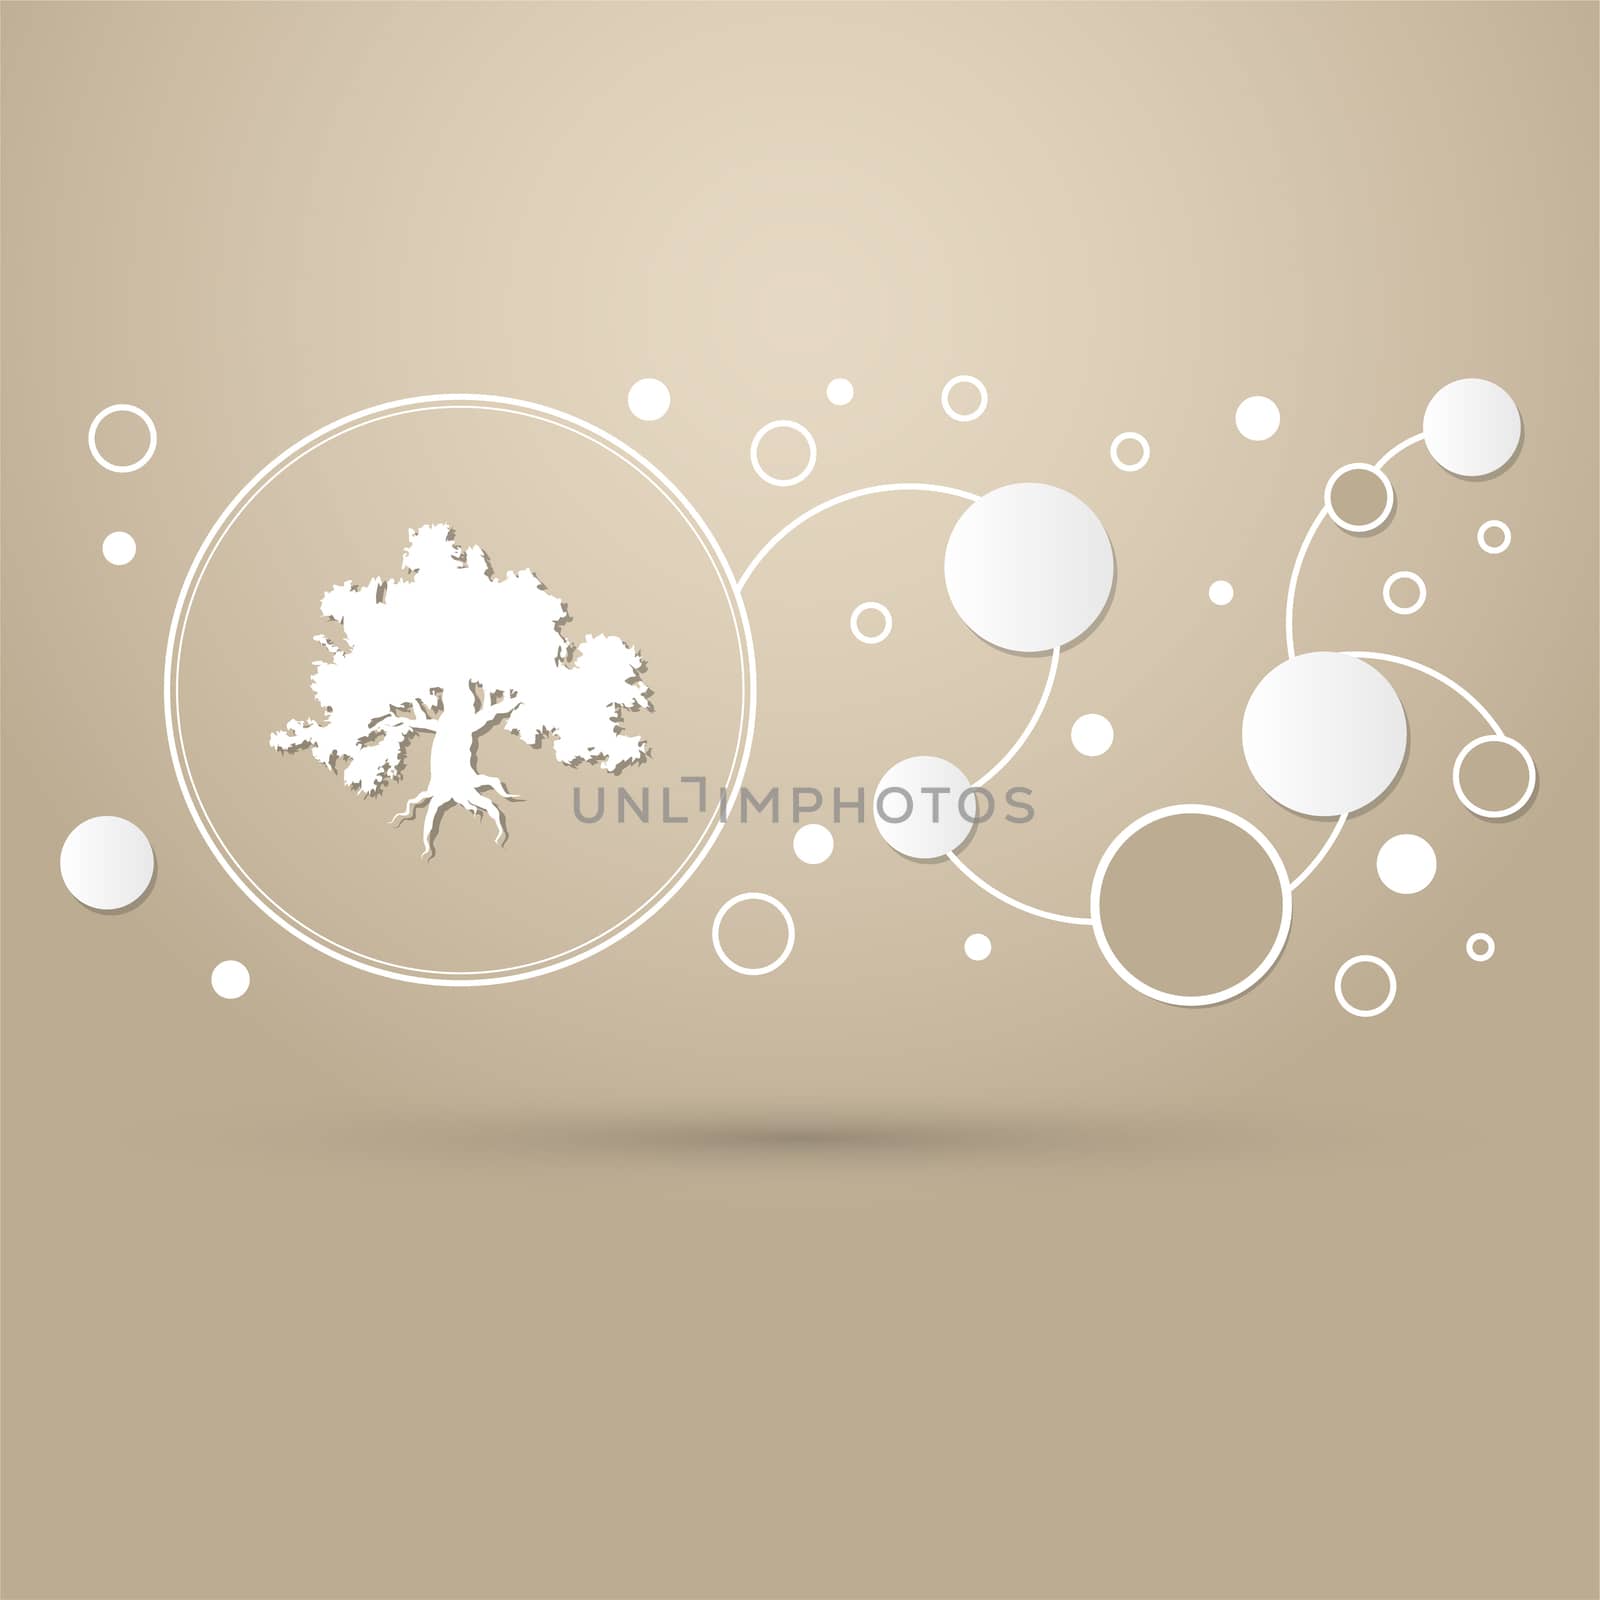 Decorative green simple tree icon on a brown background with elegant style and modern design infographic.  by Adamchuk